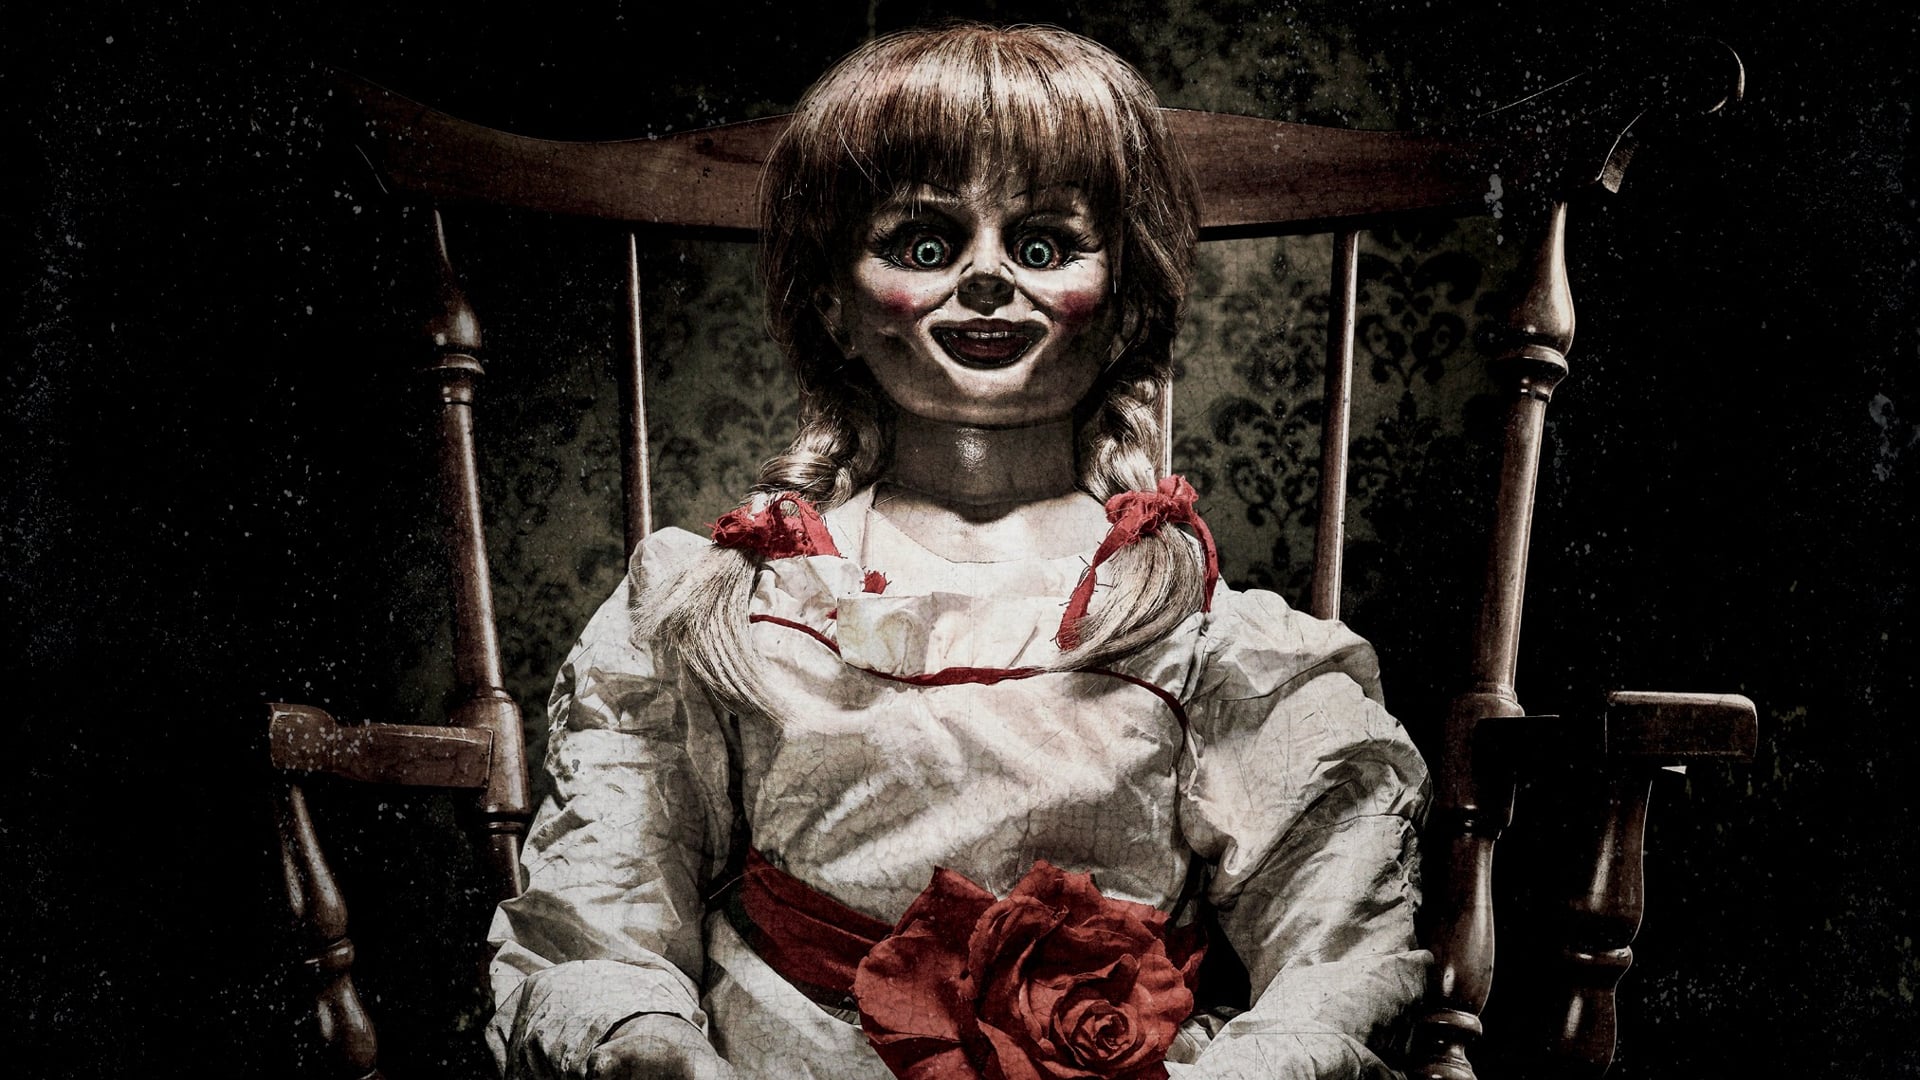 Annabelle the doll from 2014's "Annabelle" 